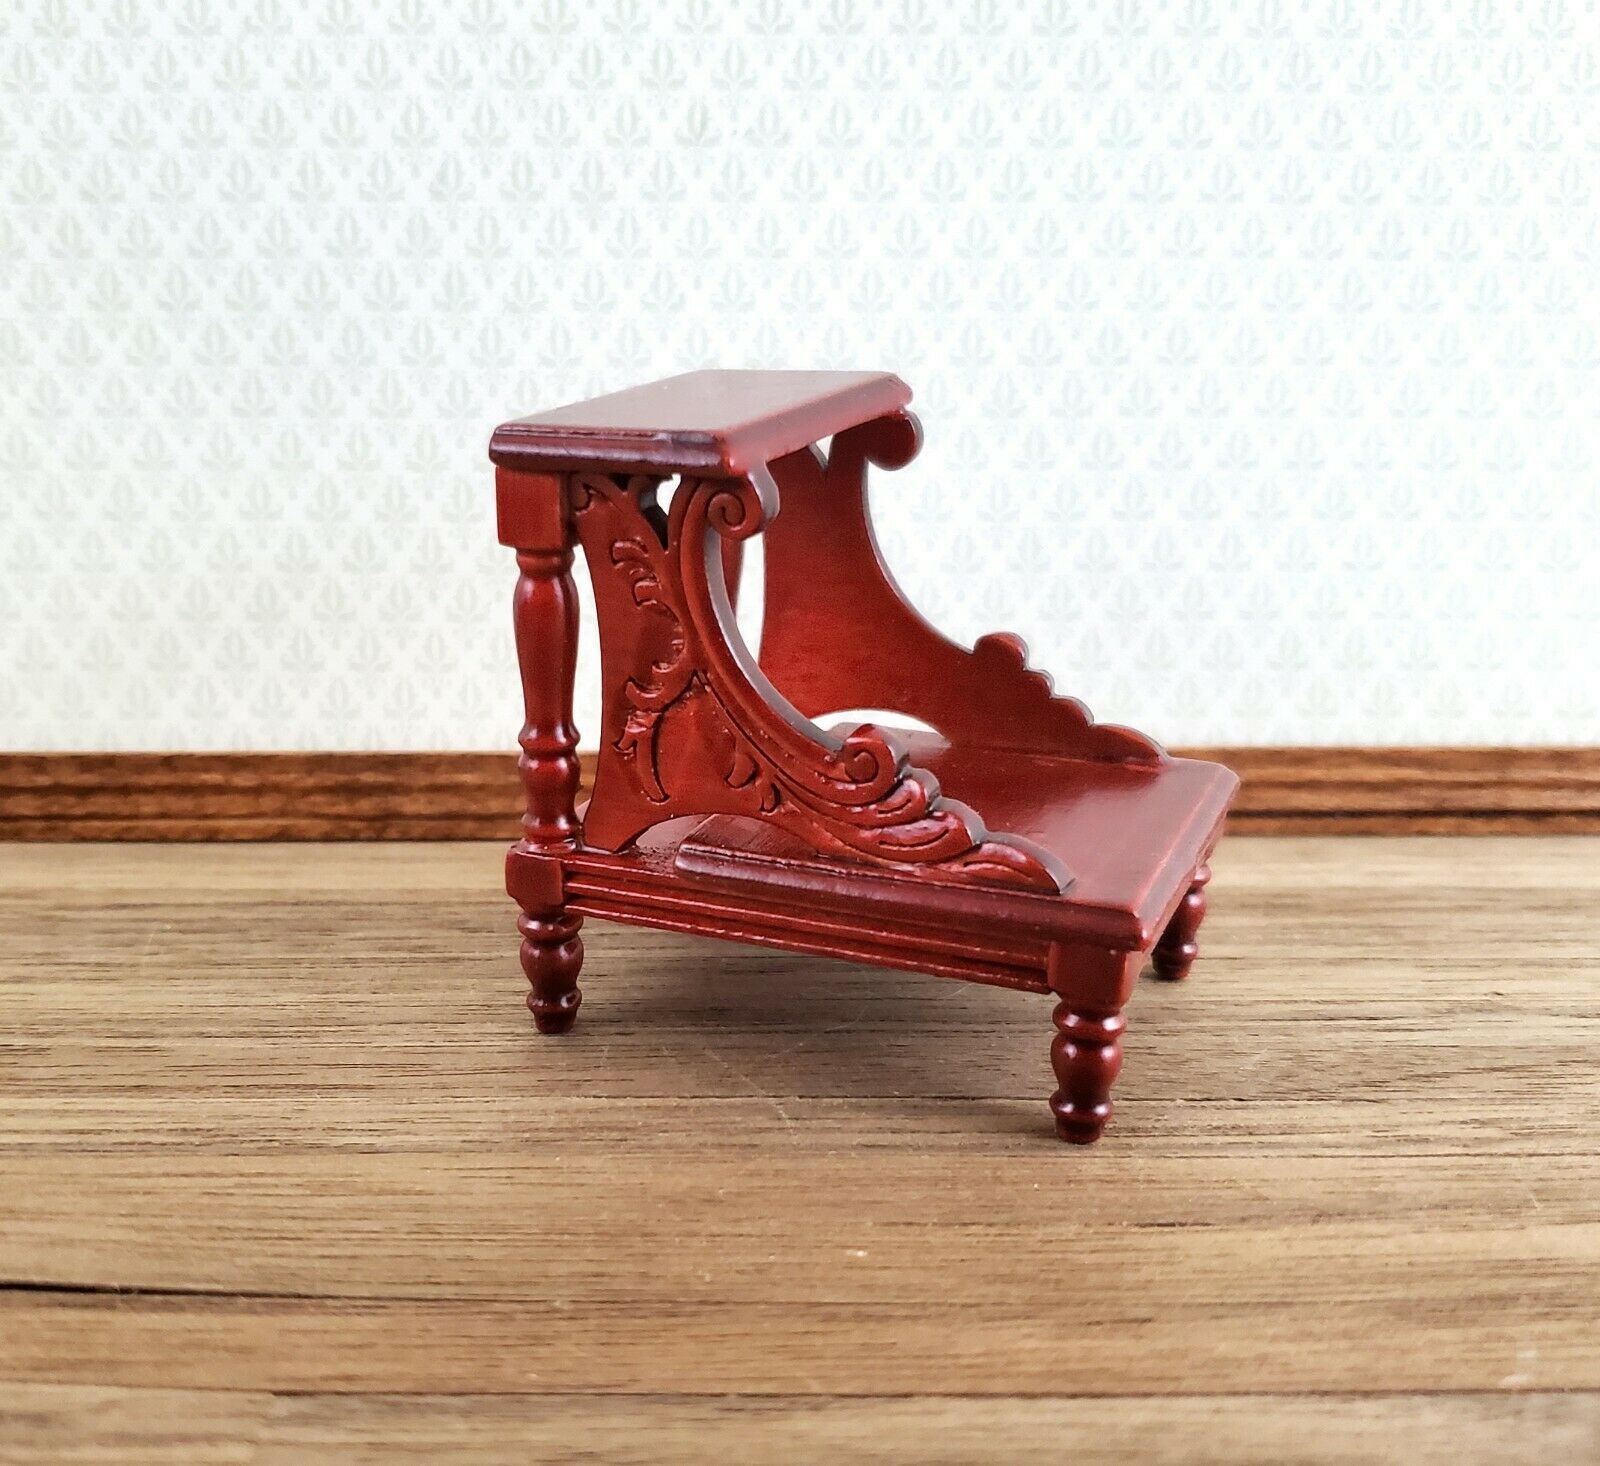 Dollhouse Miniature Library Or Bed Steps 1:12 Scale Wood Mahogany Finish